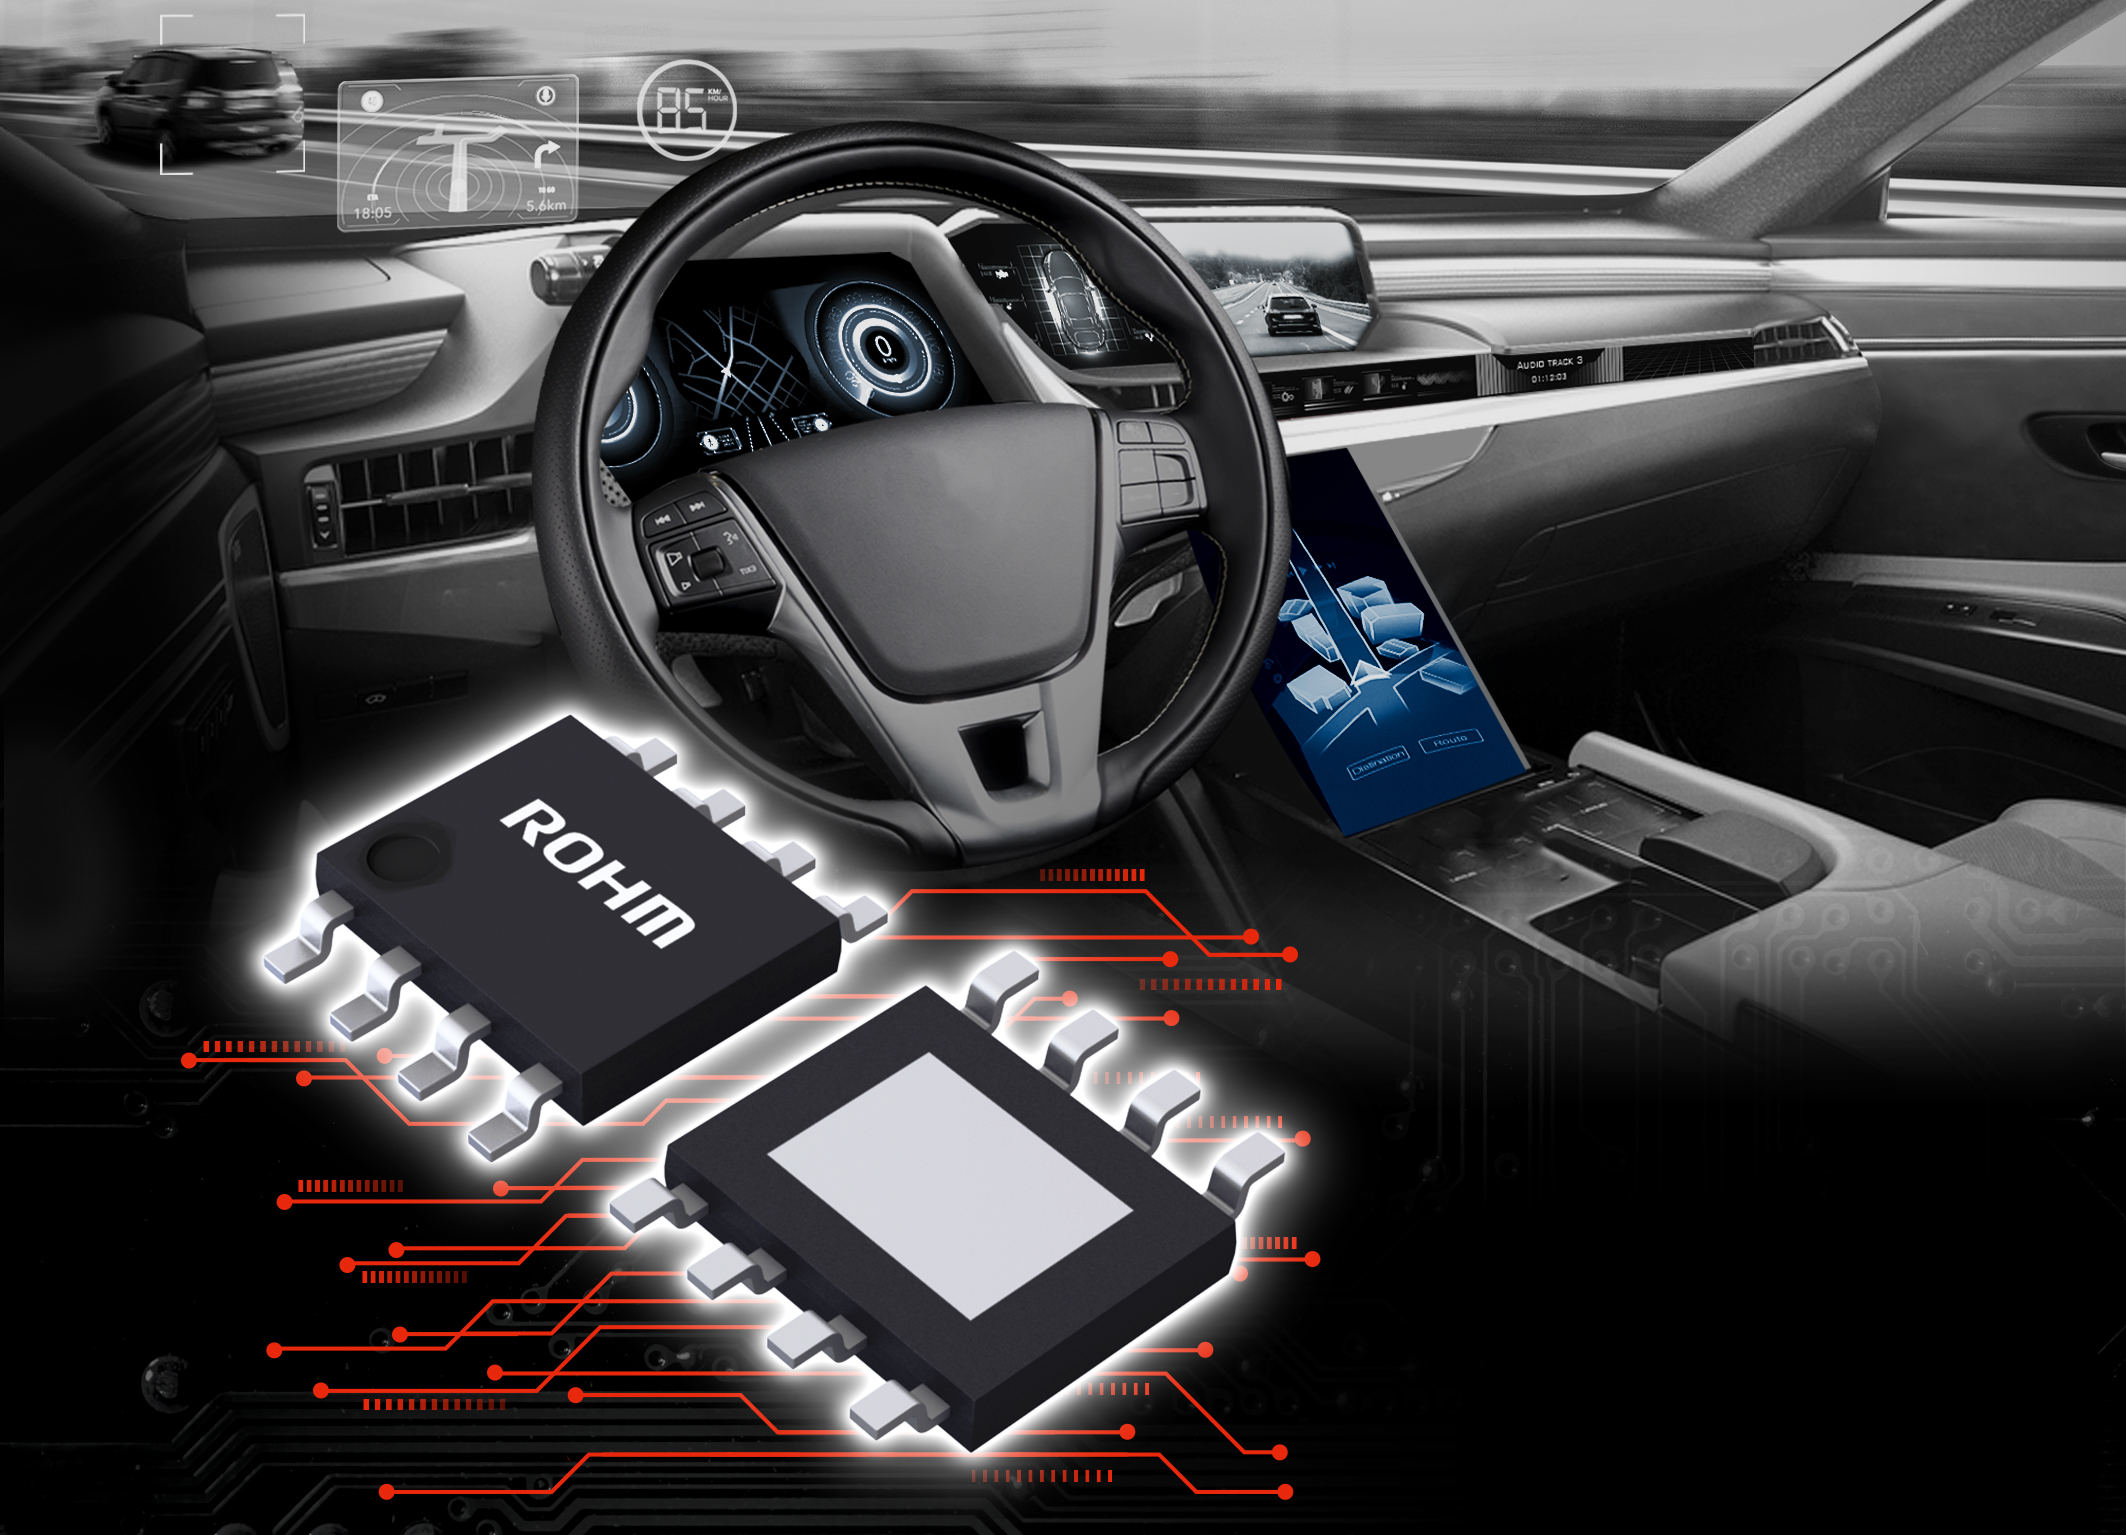 ROHM Develops Automotive Primary LDOs: Leveraging Original QuiCur Technology to Achieve Industry-Leading Load Response Characteristics